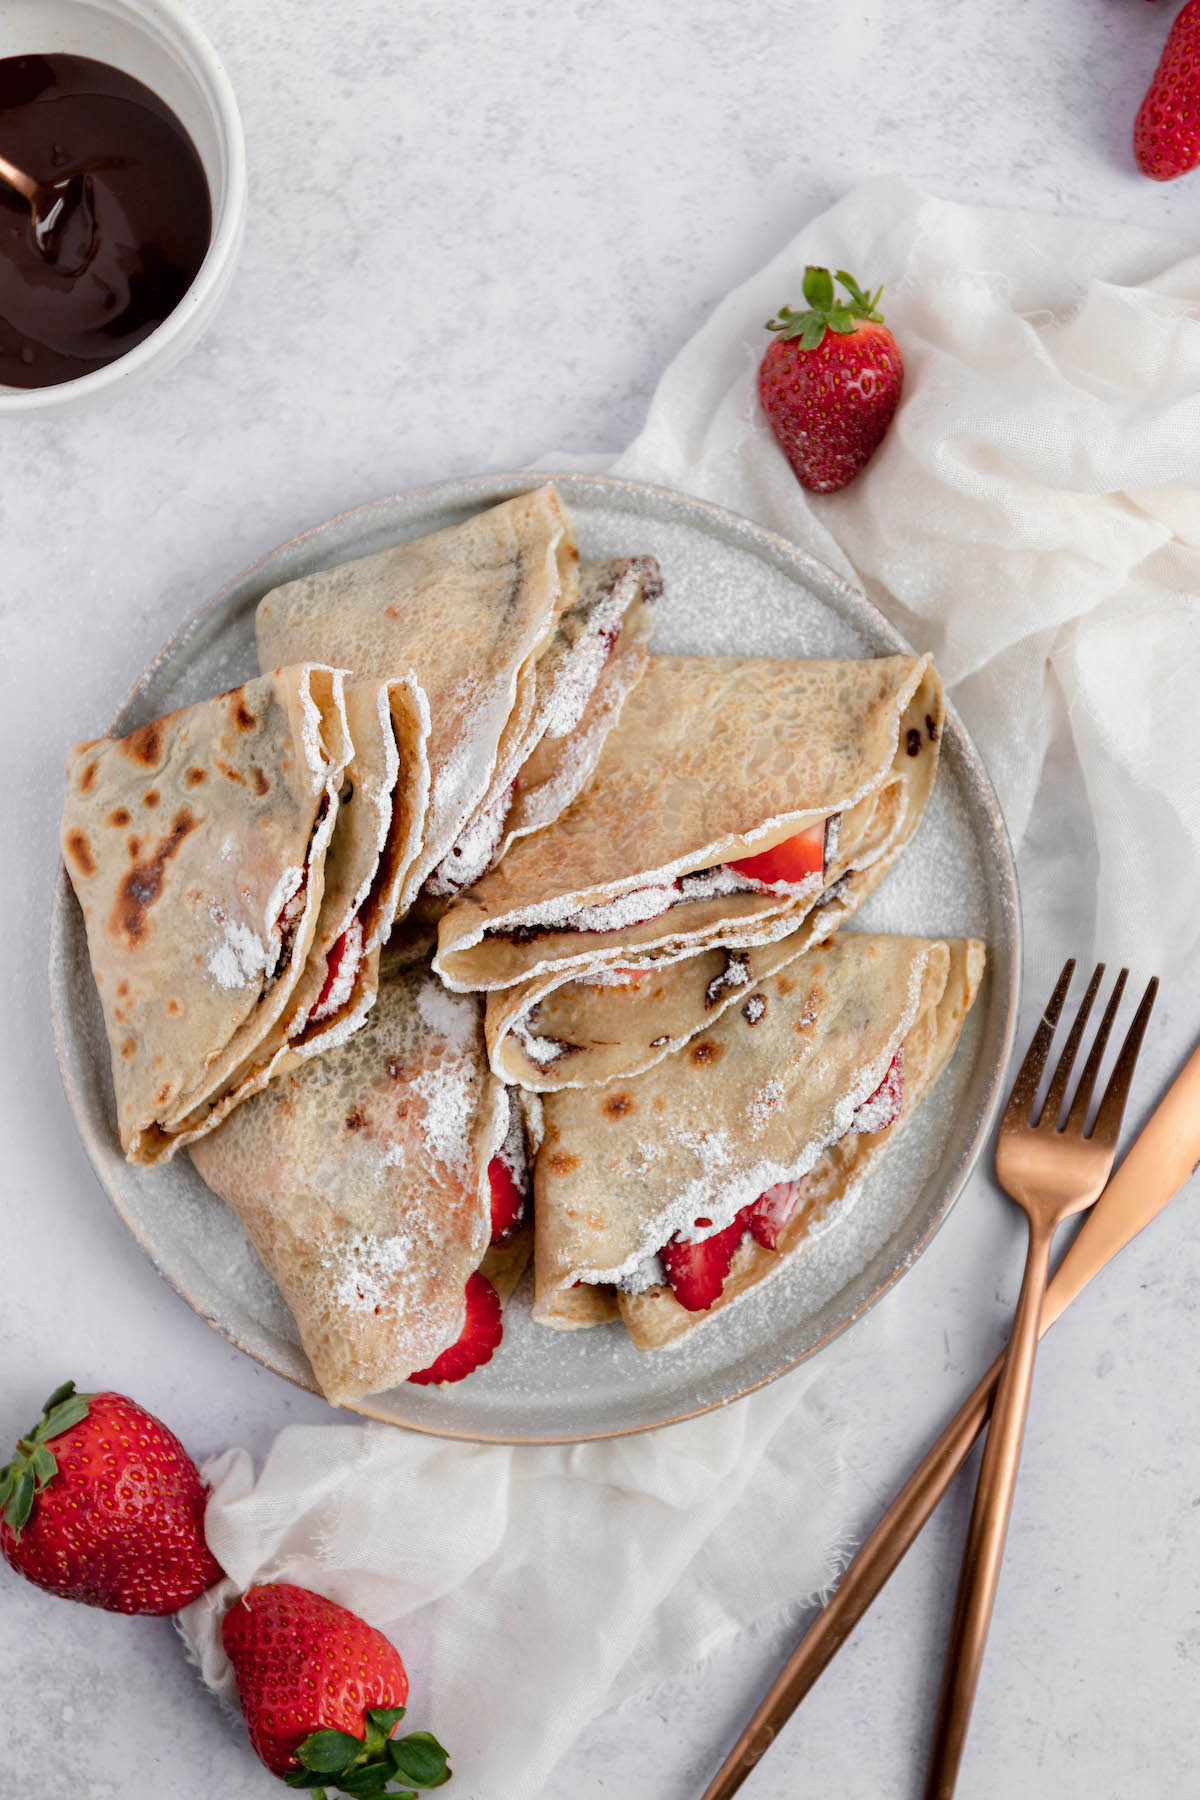 These 3-ingredient vegan crepes are the easiest sweet French treat you’ve ever tried. This egg-free crepe recipe is also low in fat, cholesterol-free and meat-eater approved. #vegan #crepes #dessert